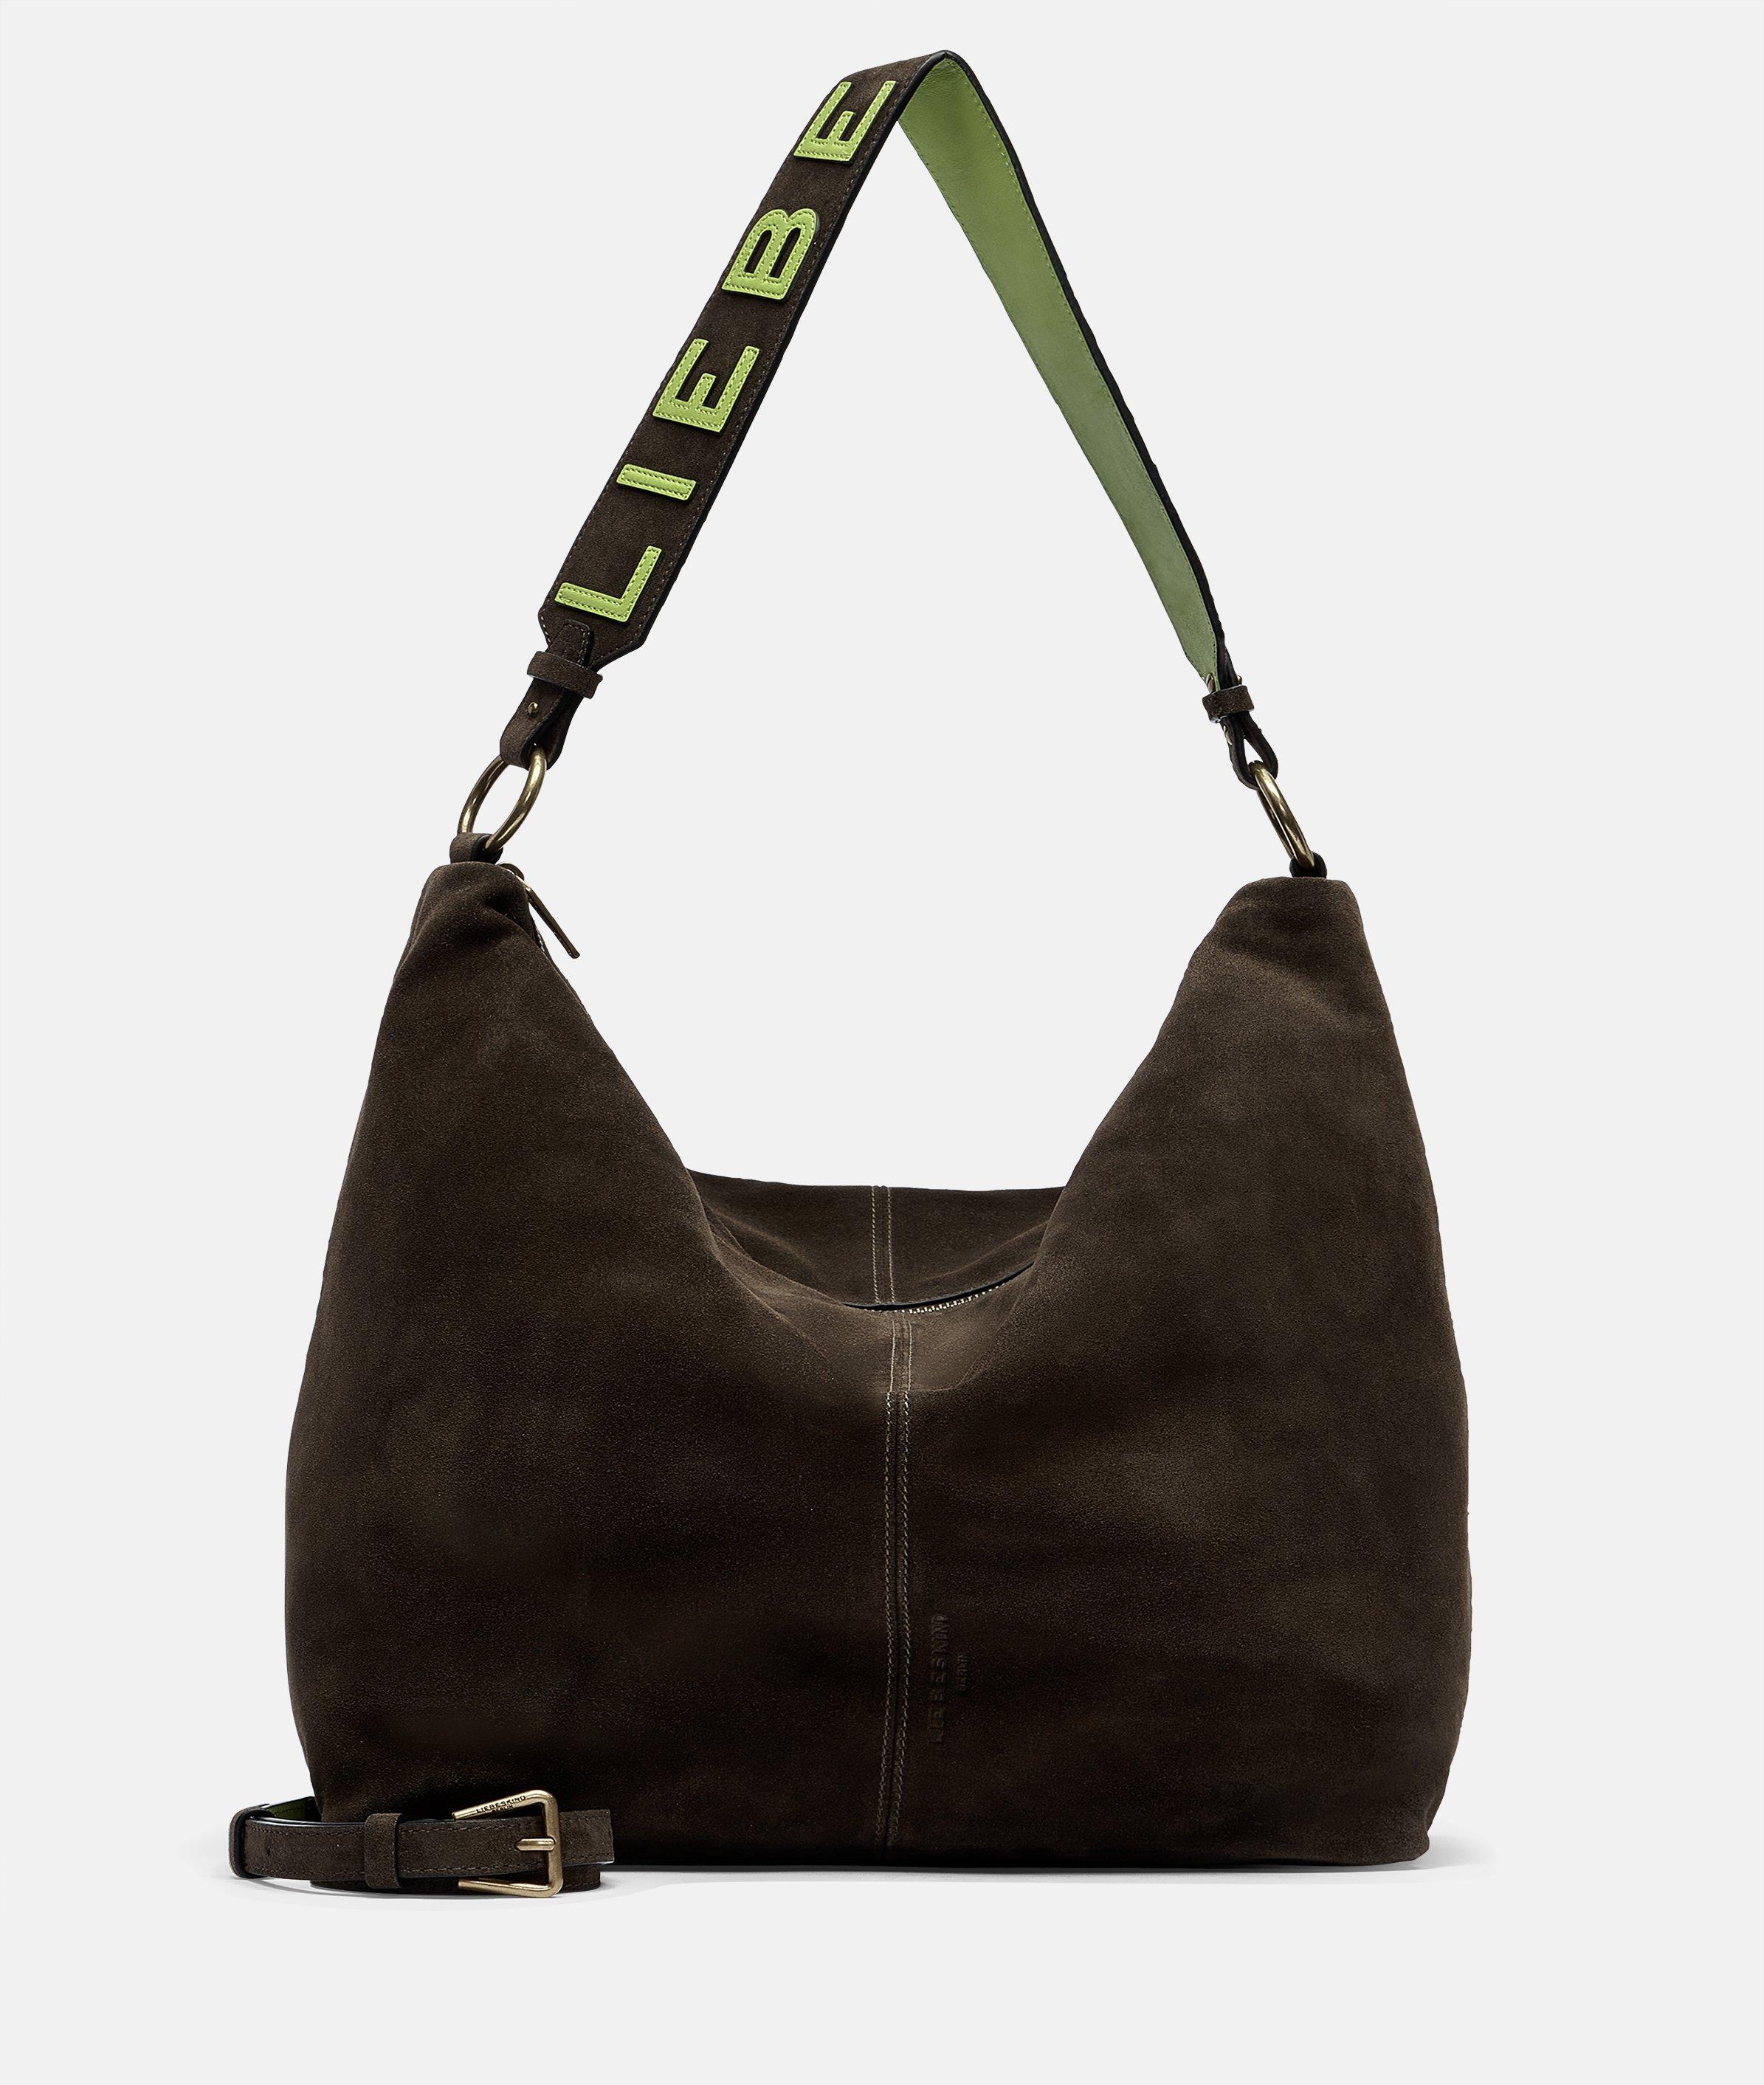 Slouch leather bag in GREEN . Large shoulder leather bag. Boho bag. Laptop  bags in suede. Large suede leather bag. GREEN suede bag.